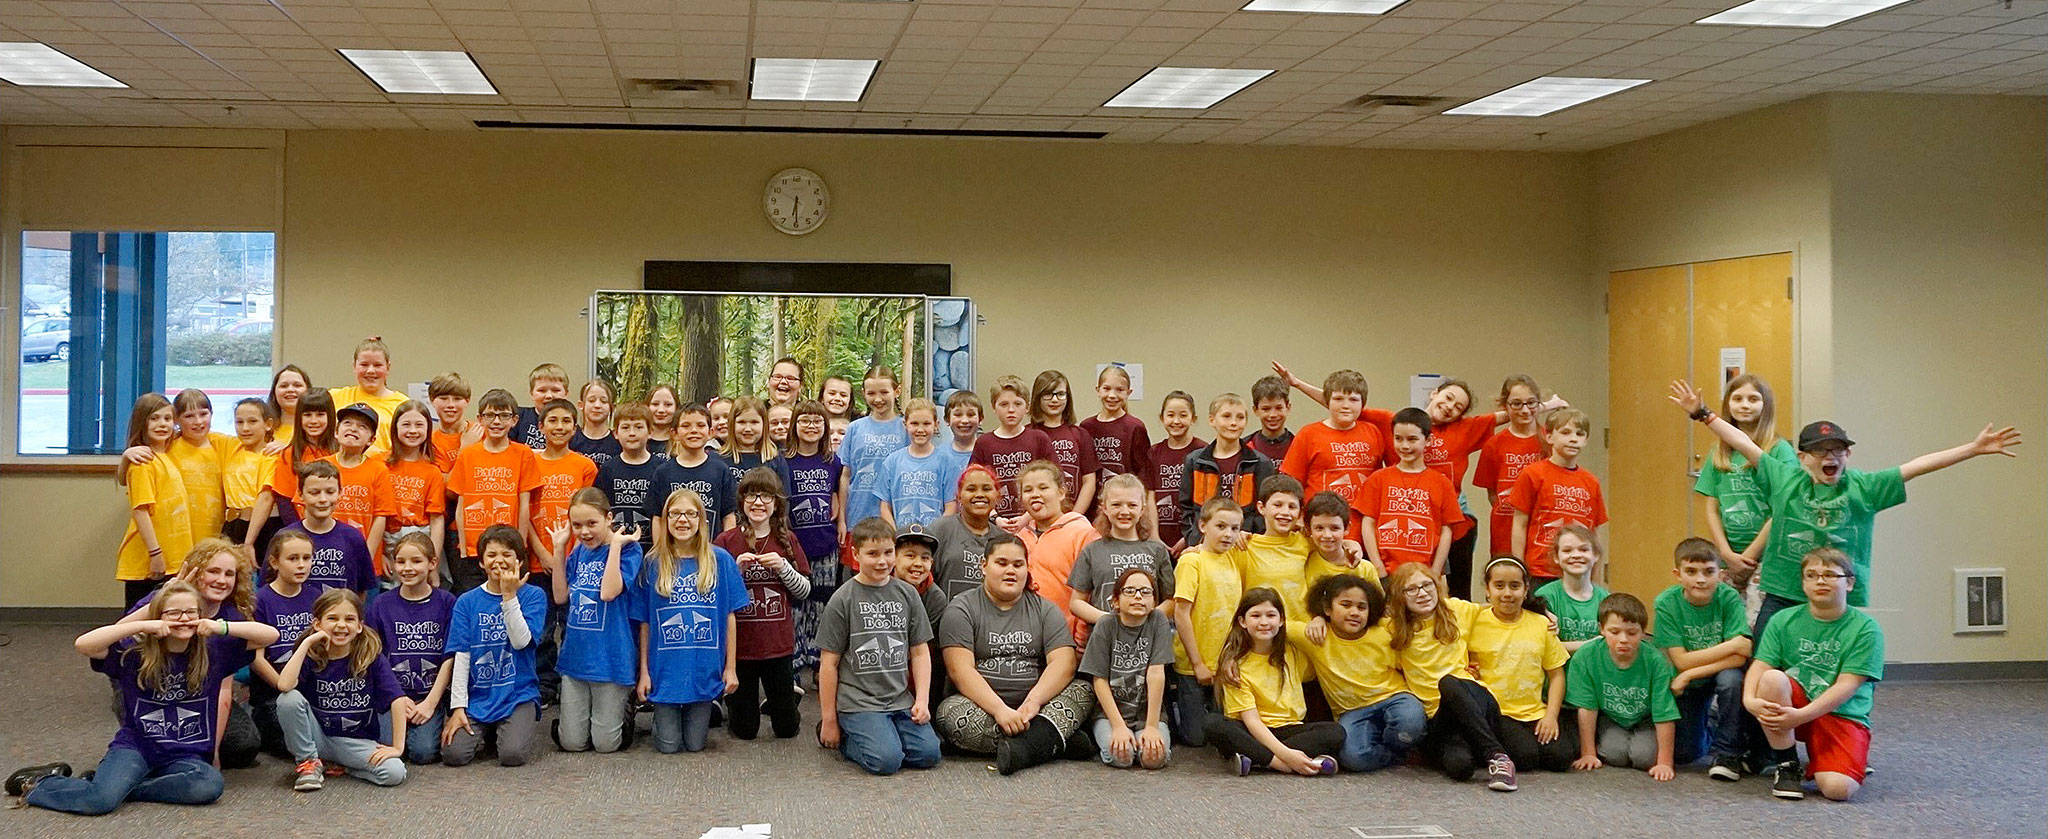 Battle of the Books now includes homeschooled students